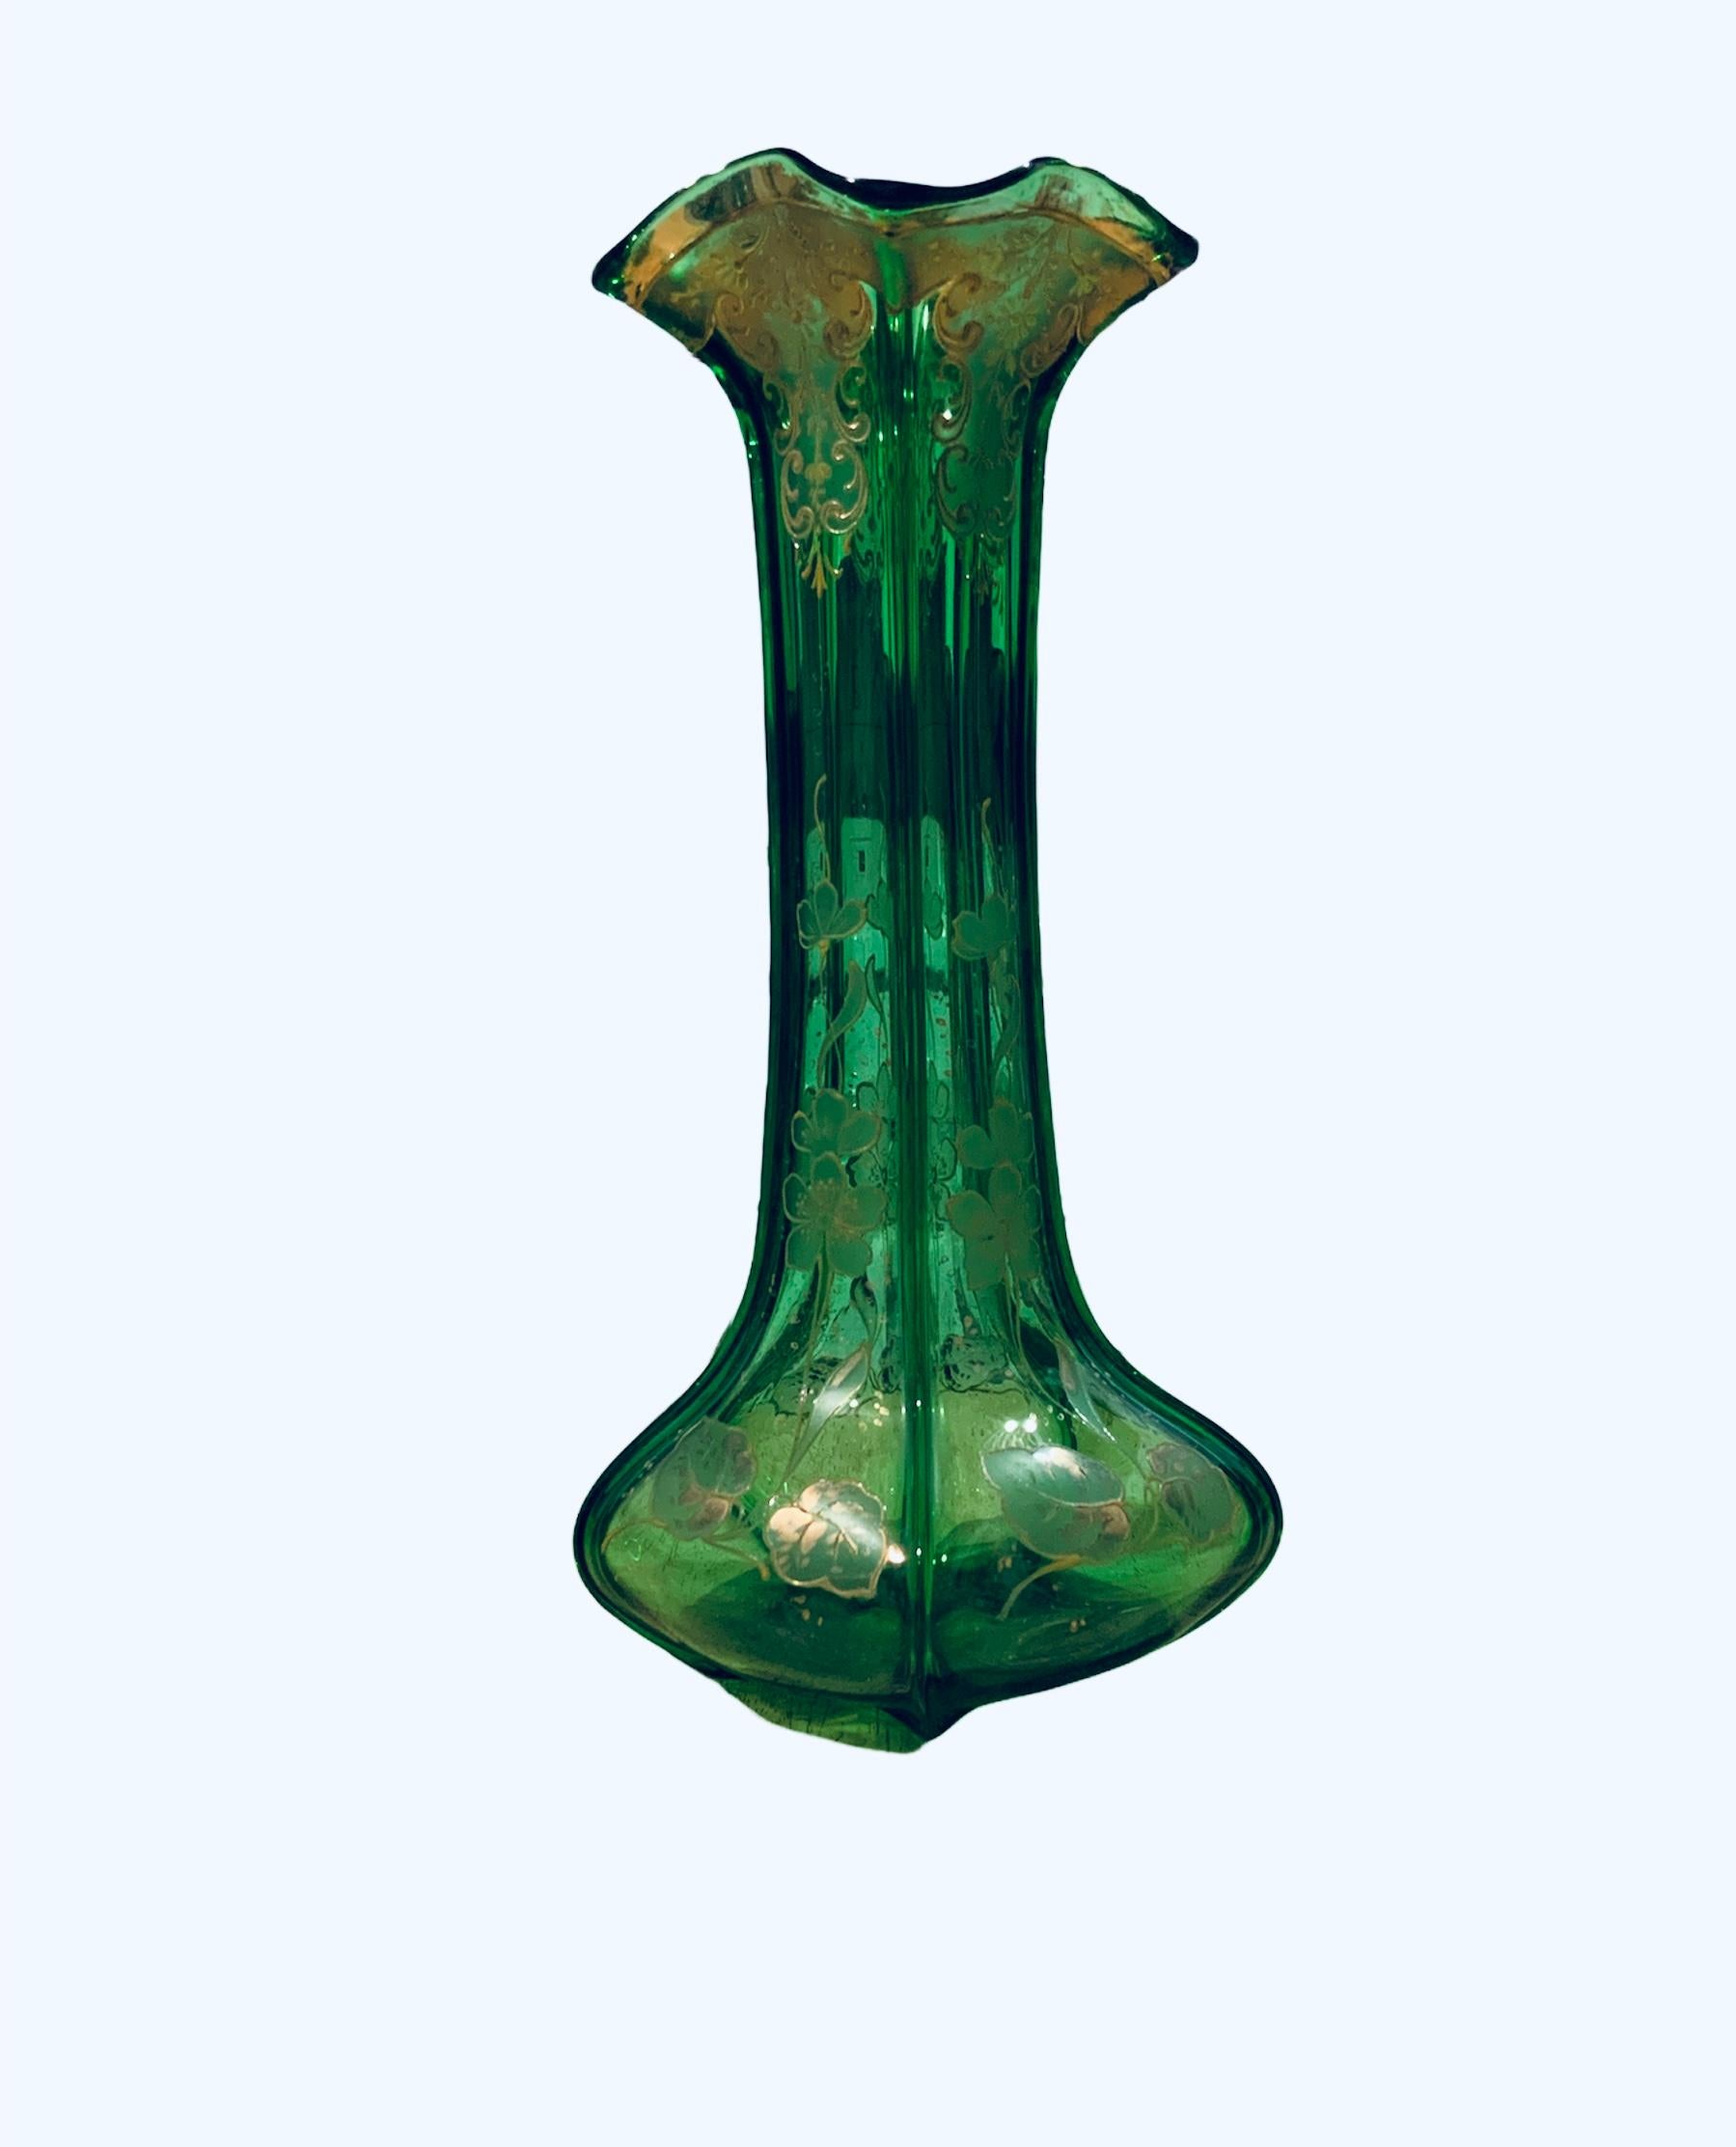 This is an Art Nouveau Style Gold enamel emerald green glass long vase. It depicts a vase with a star shaped bulbous base, long reeded neck and ruffled rim. It is adorned with gold painted branches of leaves and violets flowers. Also, gold C-scrolls